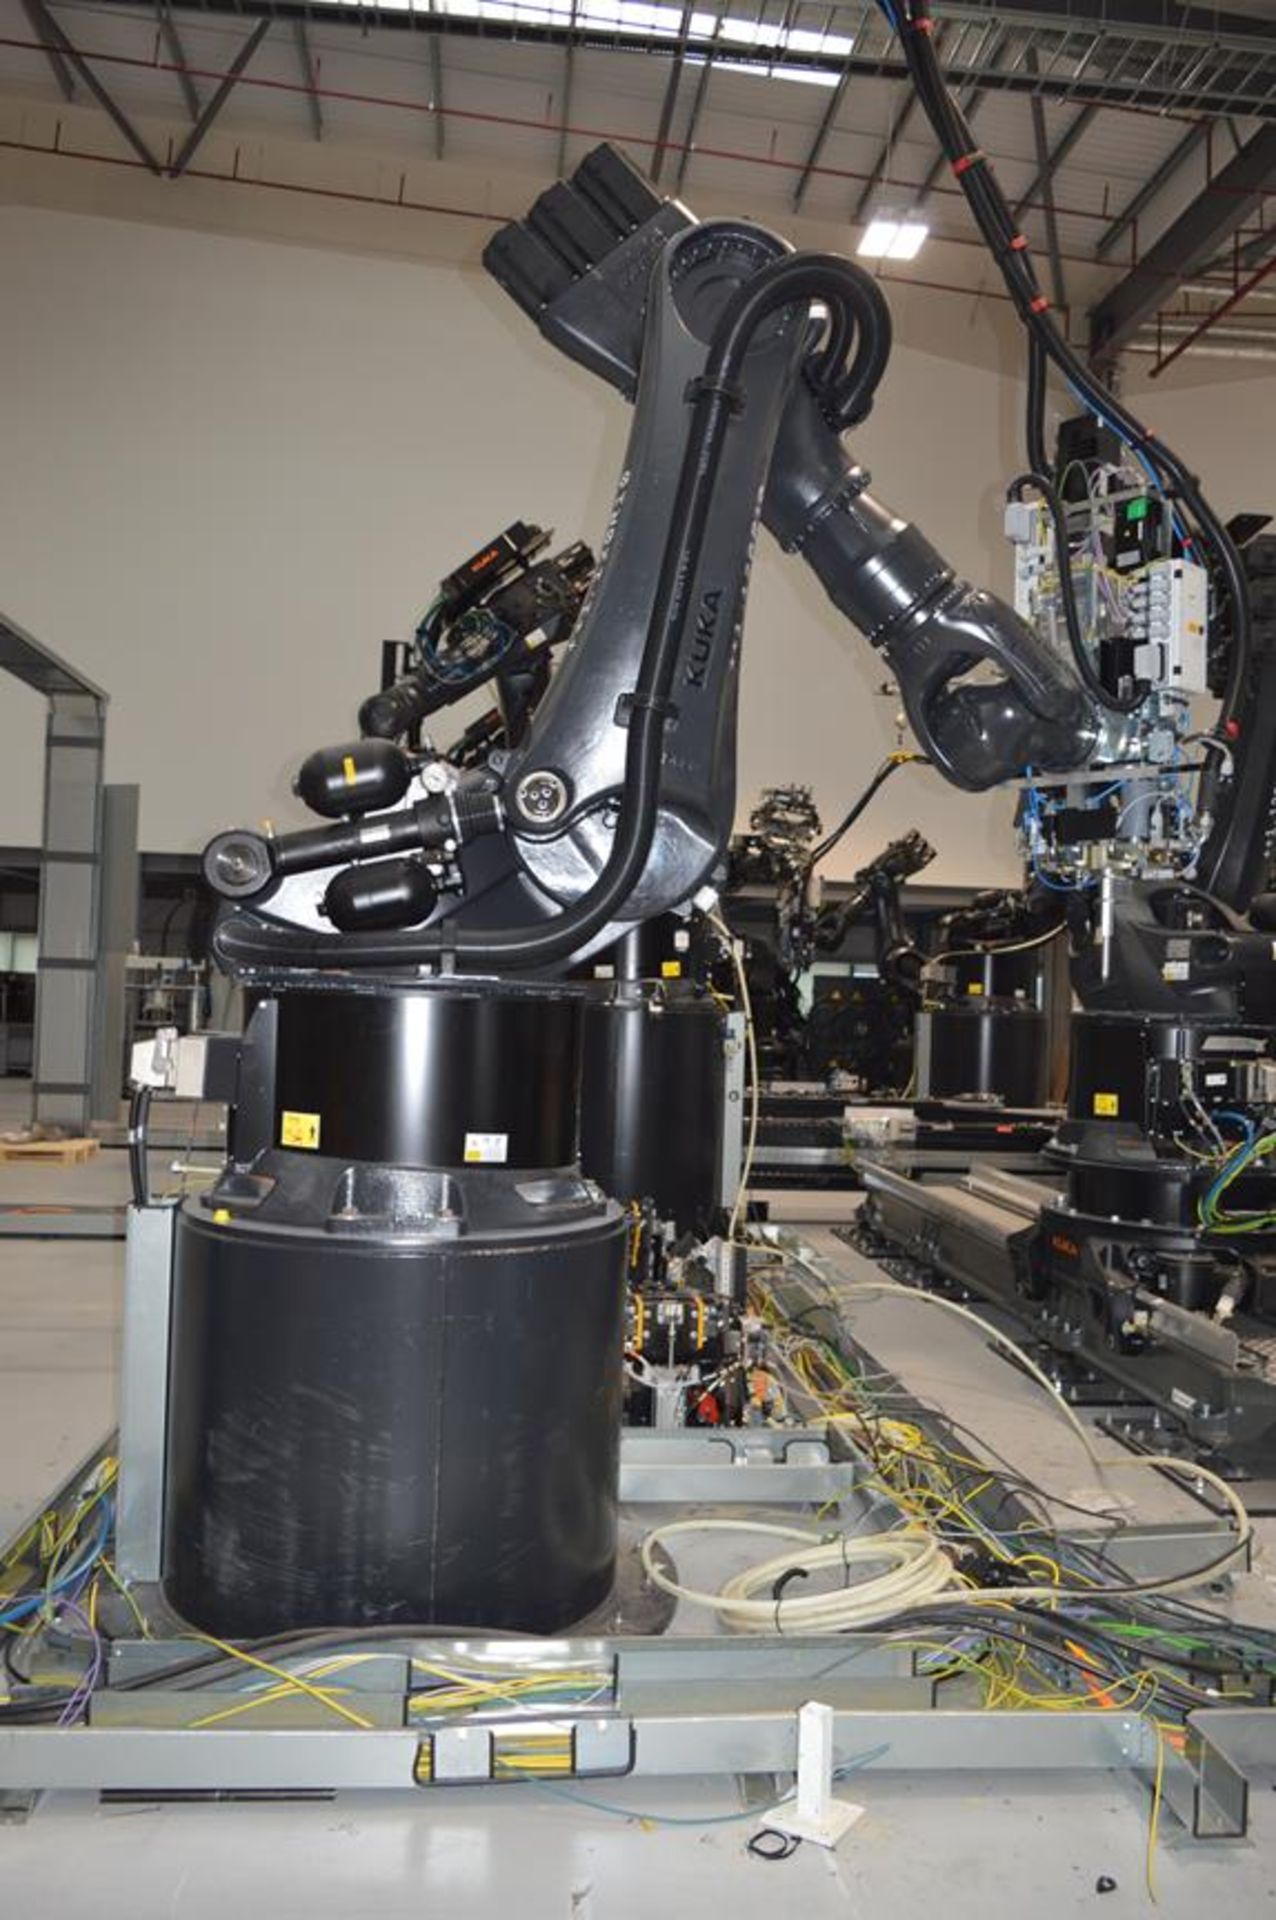 Kuka, KR280 R3080 FLR six axis robot on extended pedestal, Serial No. 4380792 (DOM: 2021) with KR C4